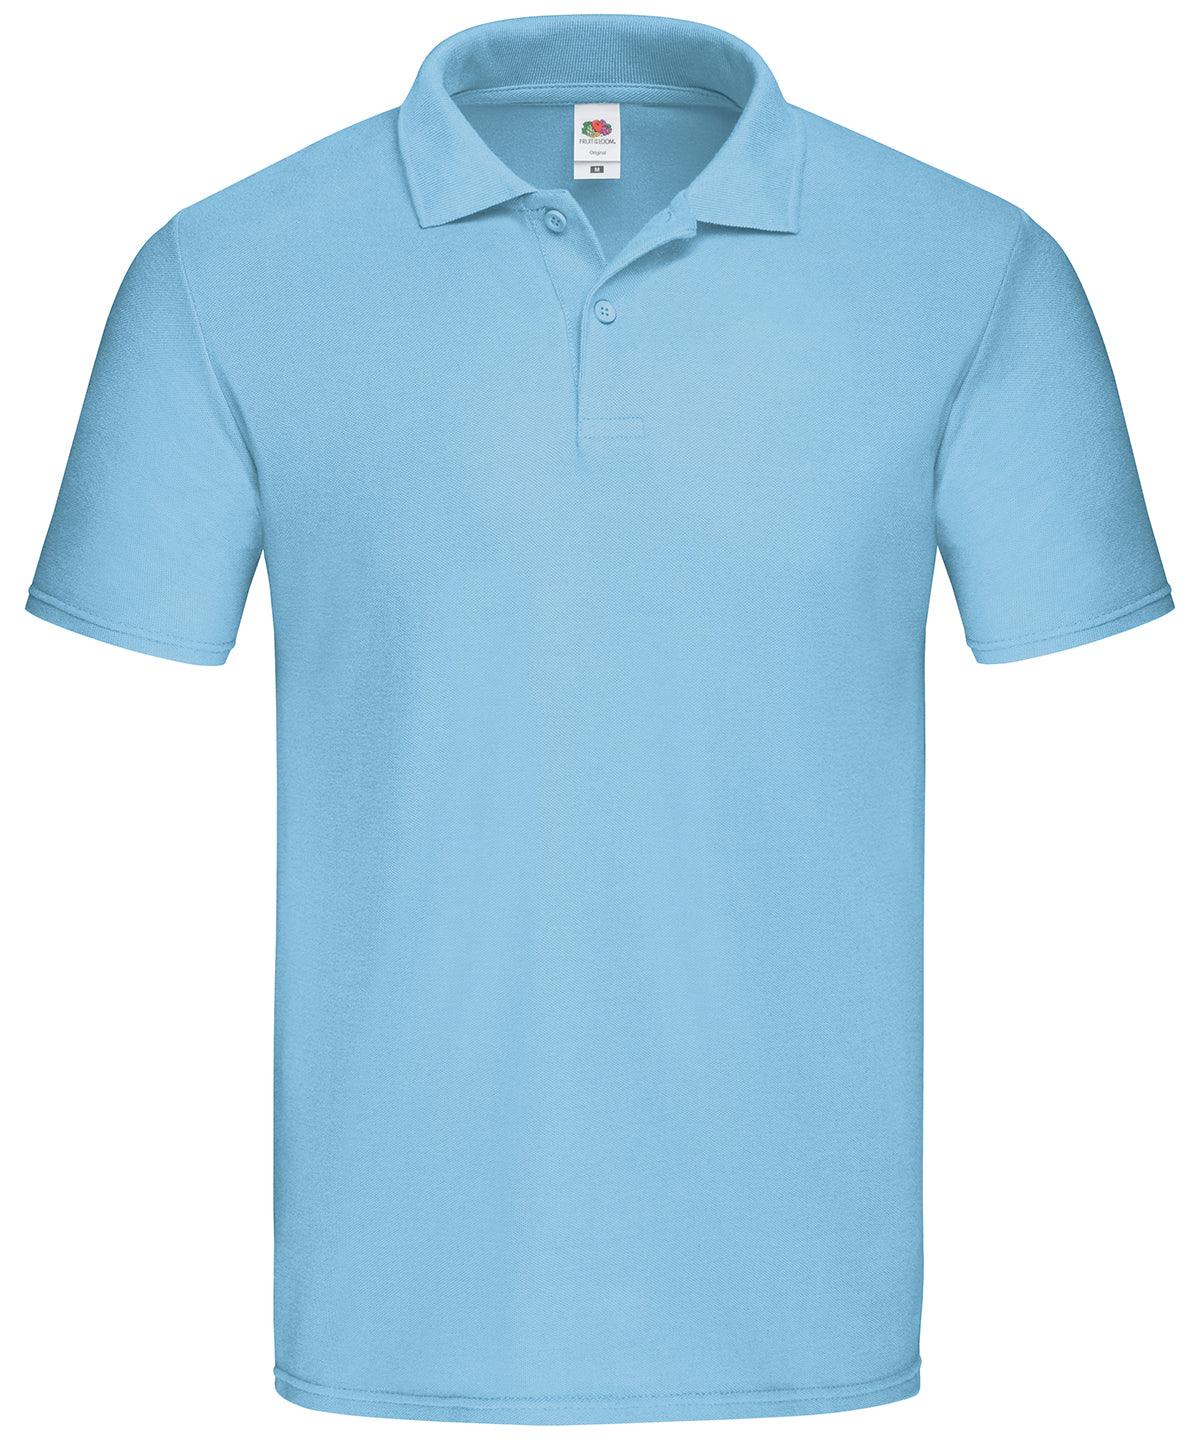 New Sky Blue - Original polo Polos Fruit of the Loom Must Haves, New For 2021, New Styles For 2021, Polos & Casual Schoolwear Centres